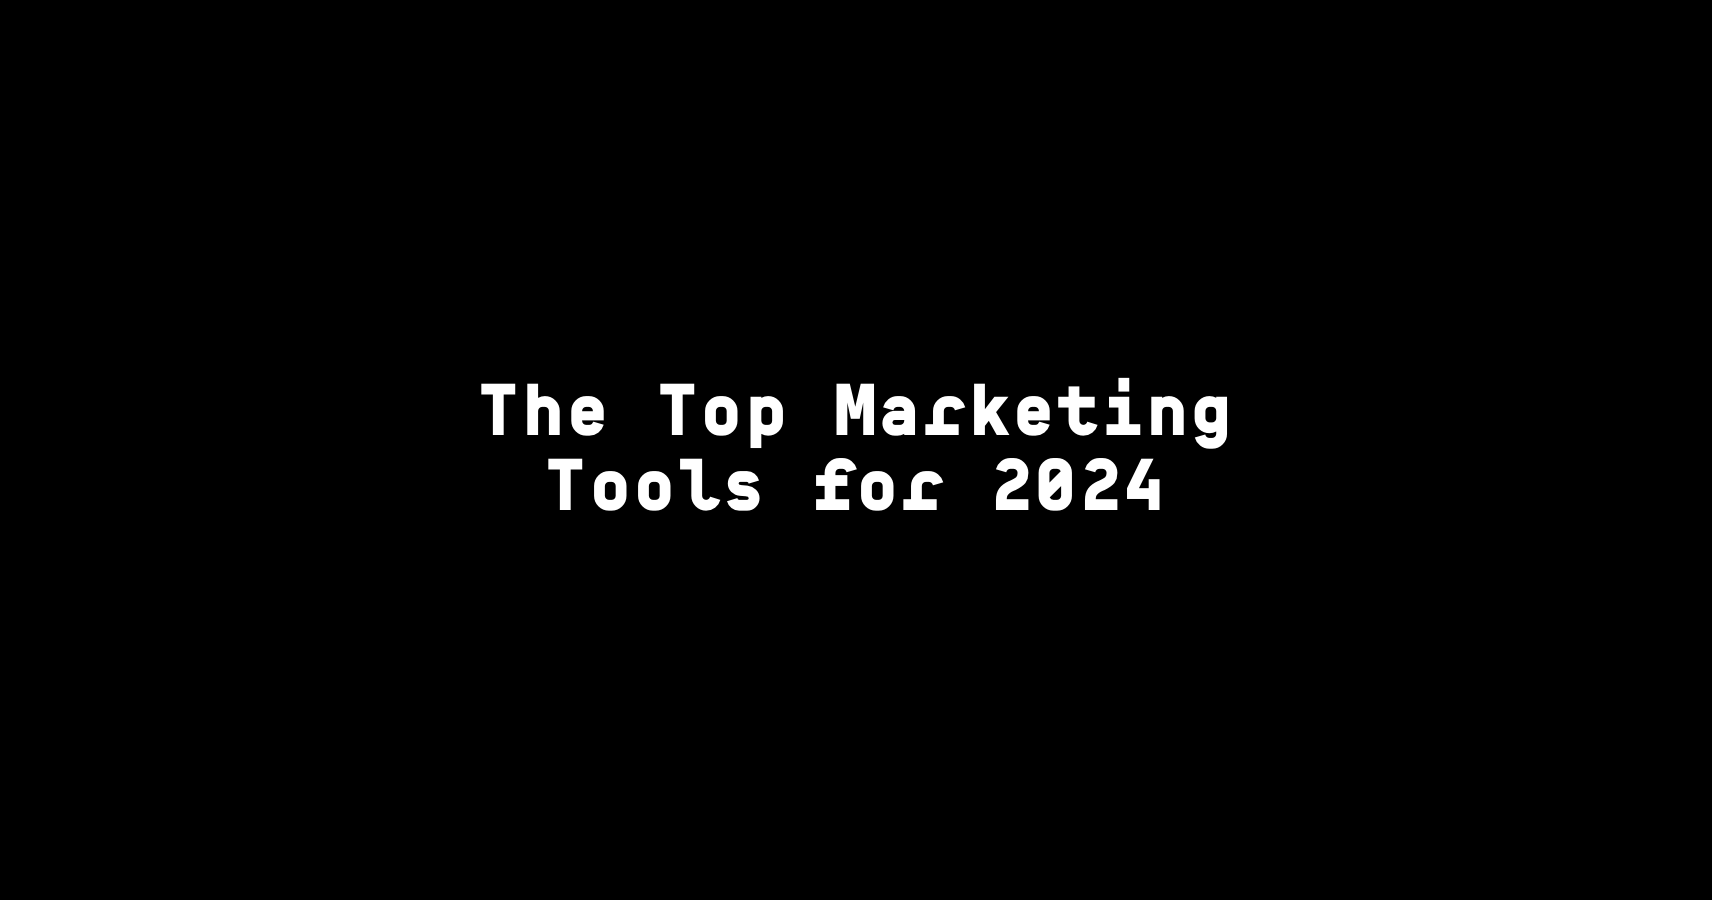 Top Marketing Tools for Q2 2024 – Essential Digital Tools for Marketers